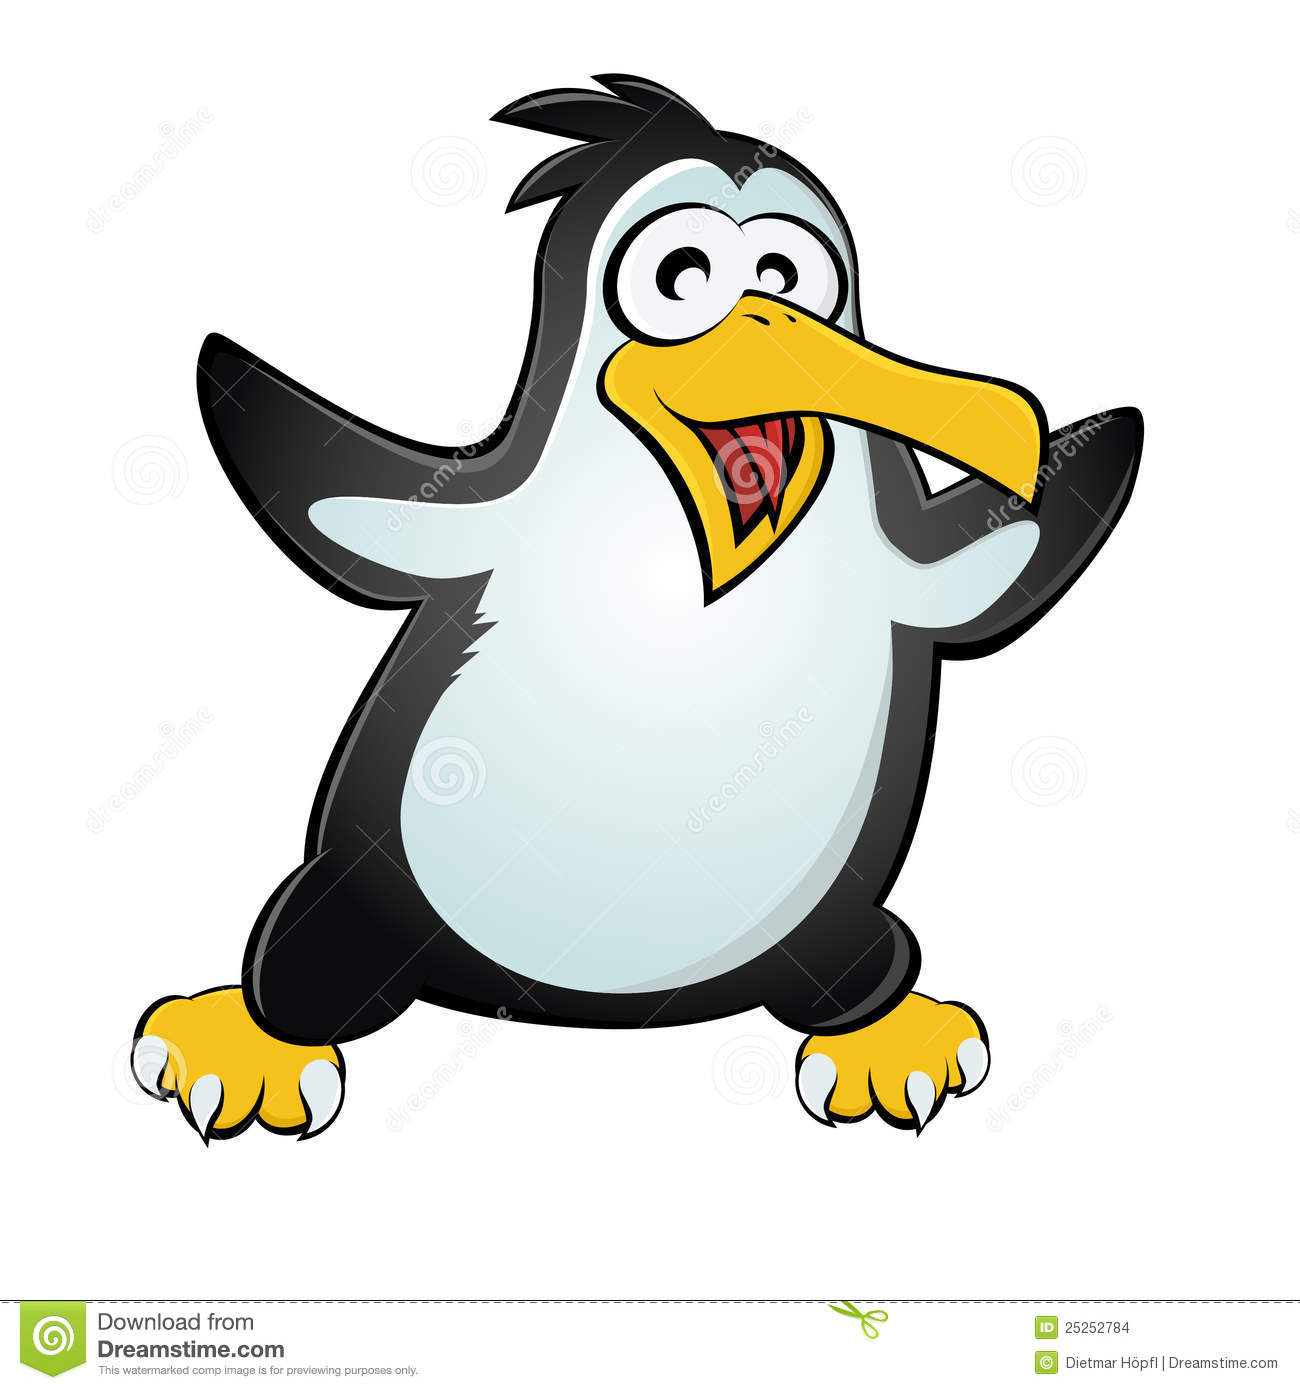 Illustration Of A Funny Cartoon Penguin  Silly Thank You Clip Art